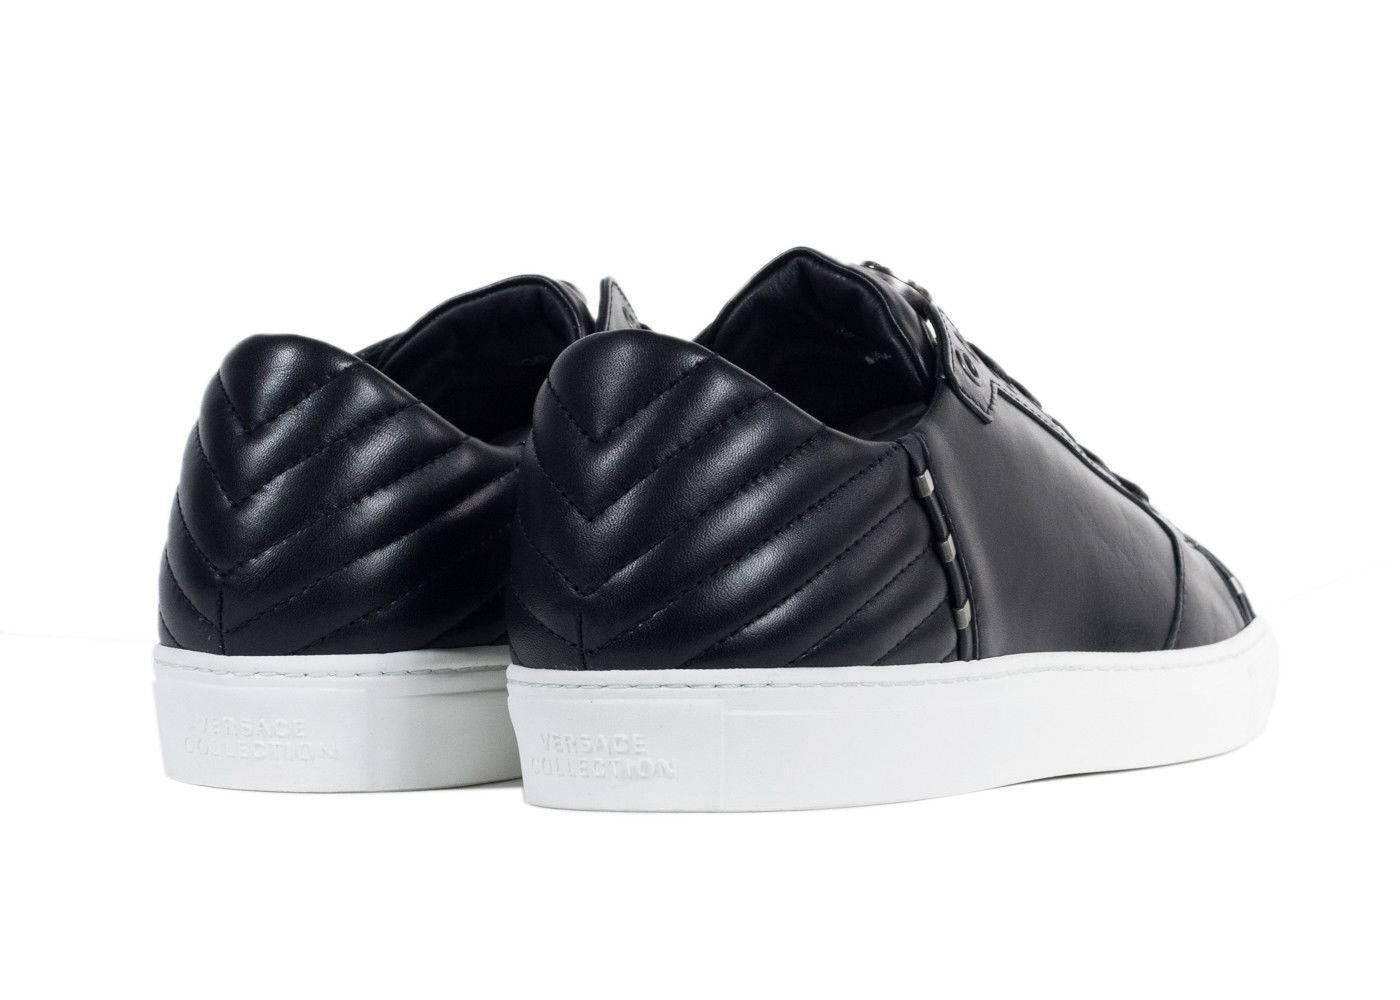 Leave an impact in your Low Top Black Versace Collection Sneakers. These leather sneakers feature modern metal rivets, an artistically chevron stitched heel, and signature 3-D Logo Emblem on the Tongue. Pair these sneakers with black leather pants